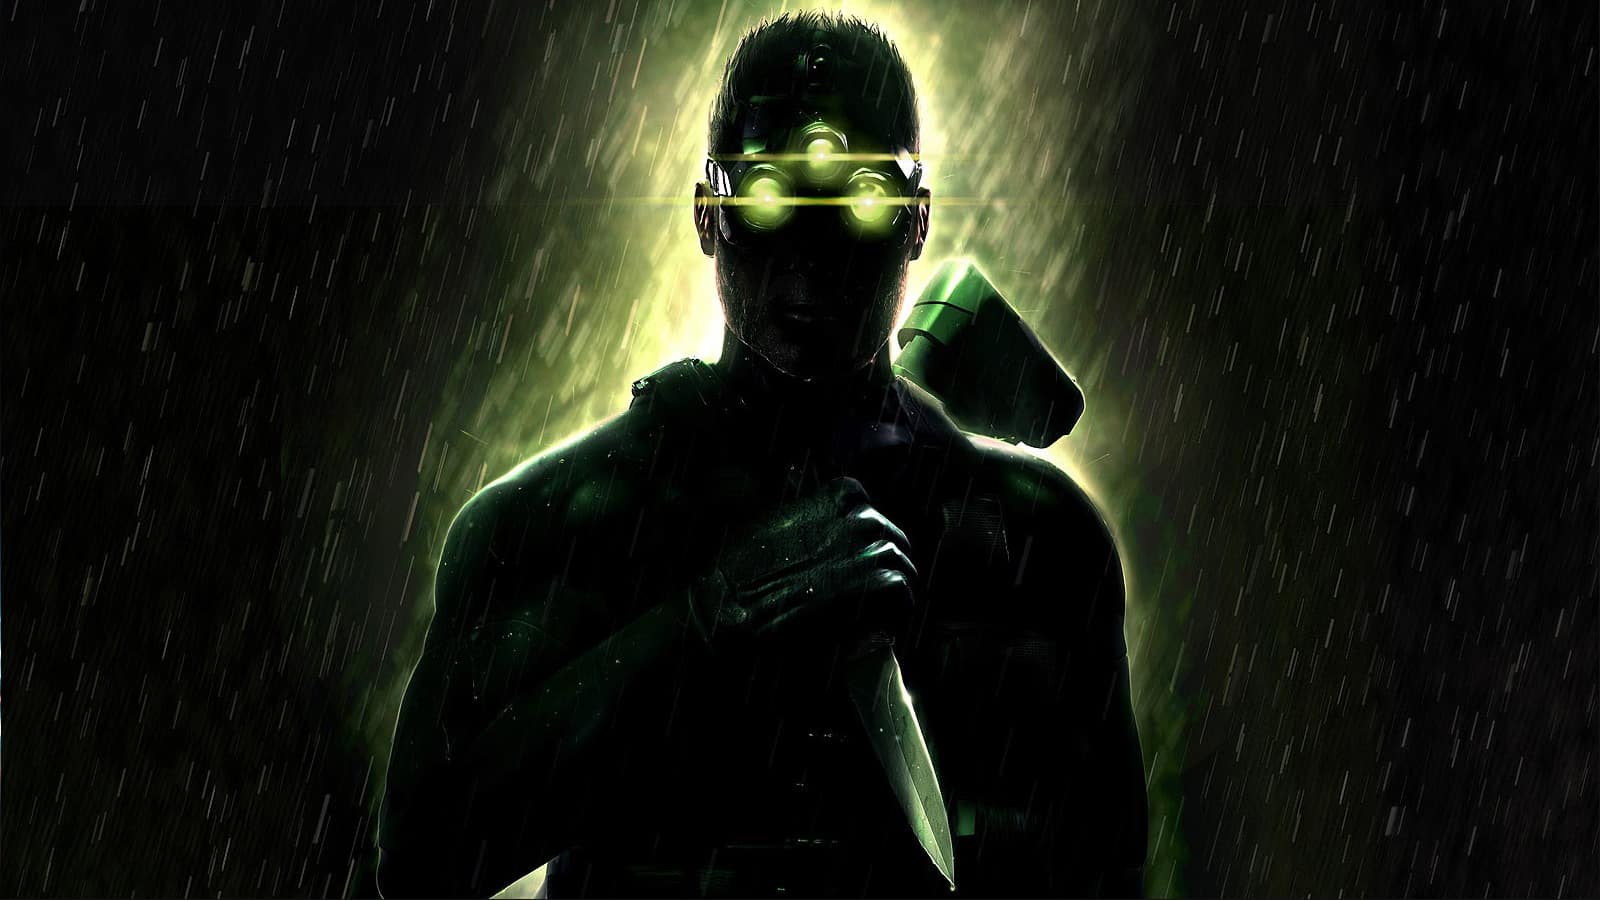 Ubisoft has announced a remake of Splinter Cell is in development